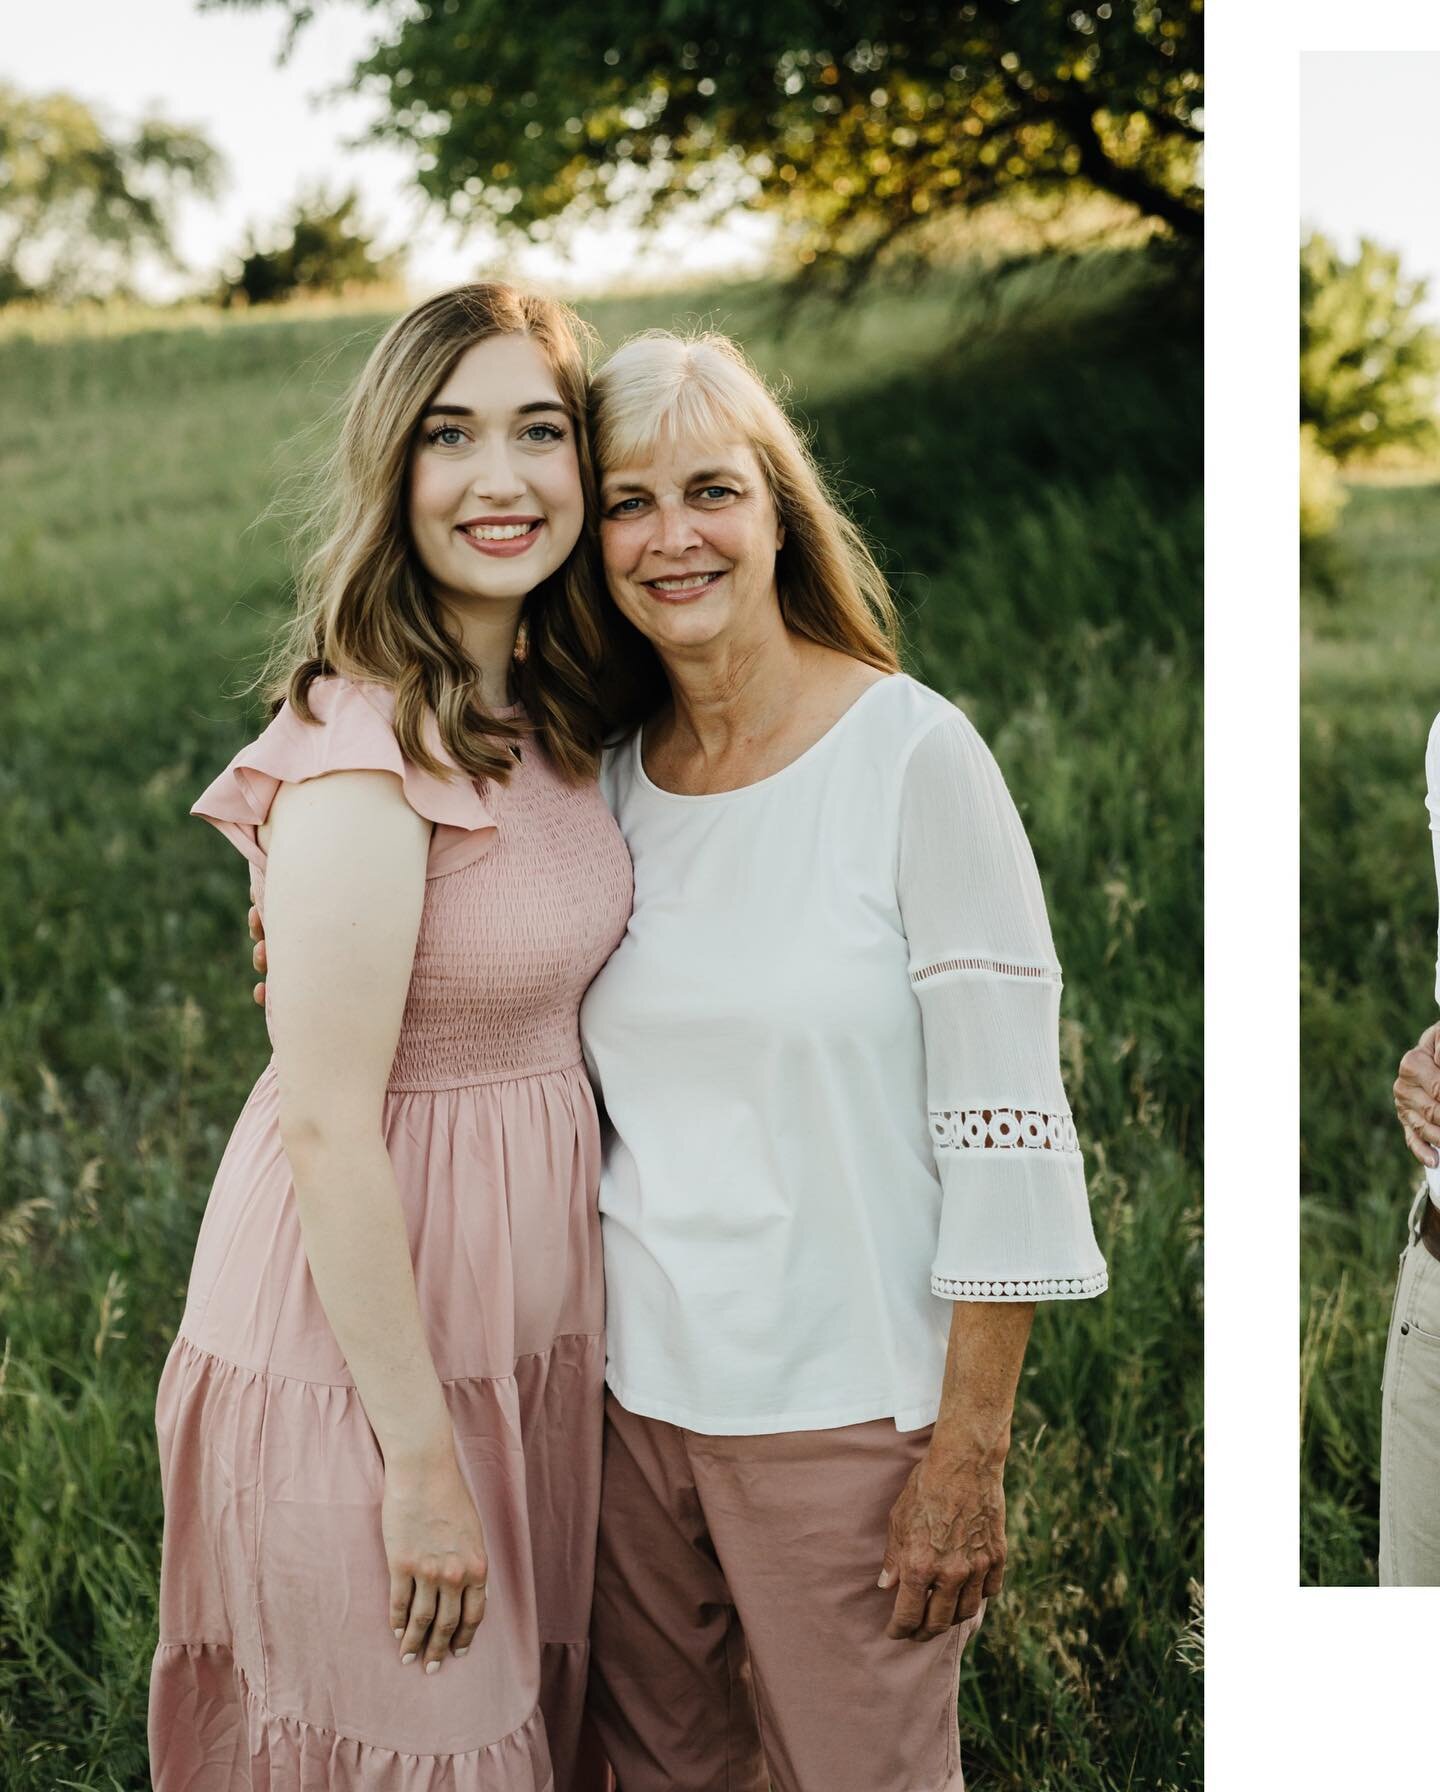 One of the best feelings as photographers is when returning clients bring more family to their next shoot (and when they show up perfectly styled and coordinating😅🥹). Love how these turned out and love working with this sweet fam!